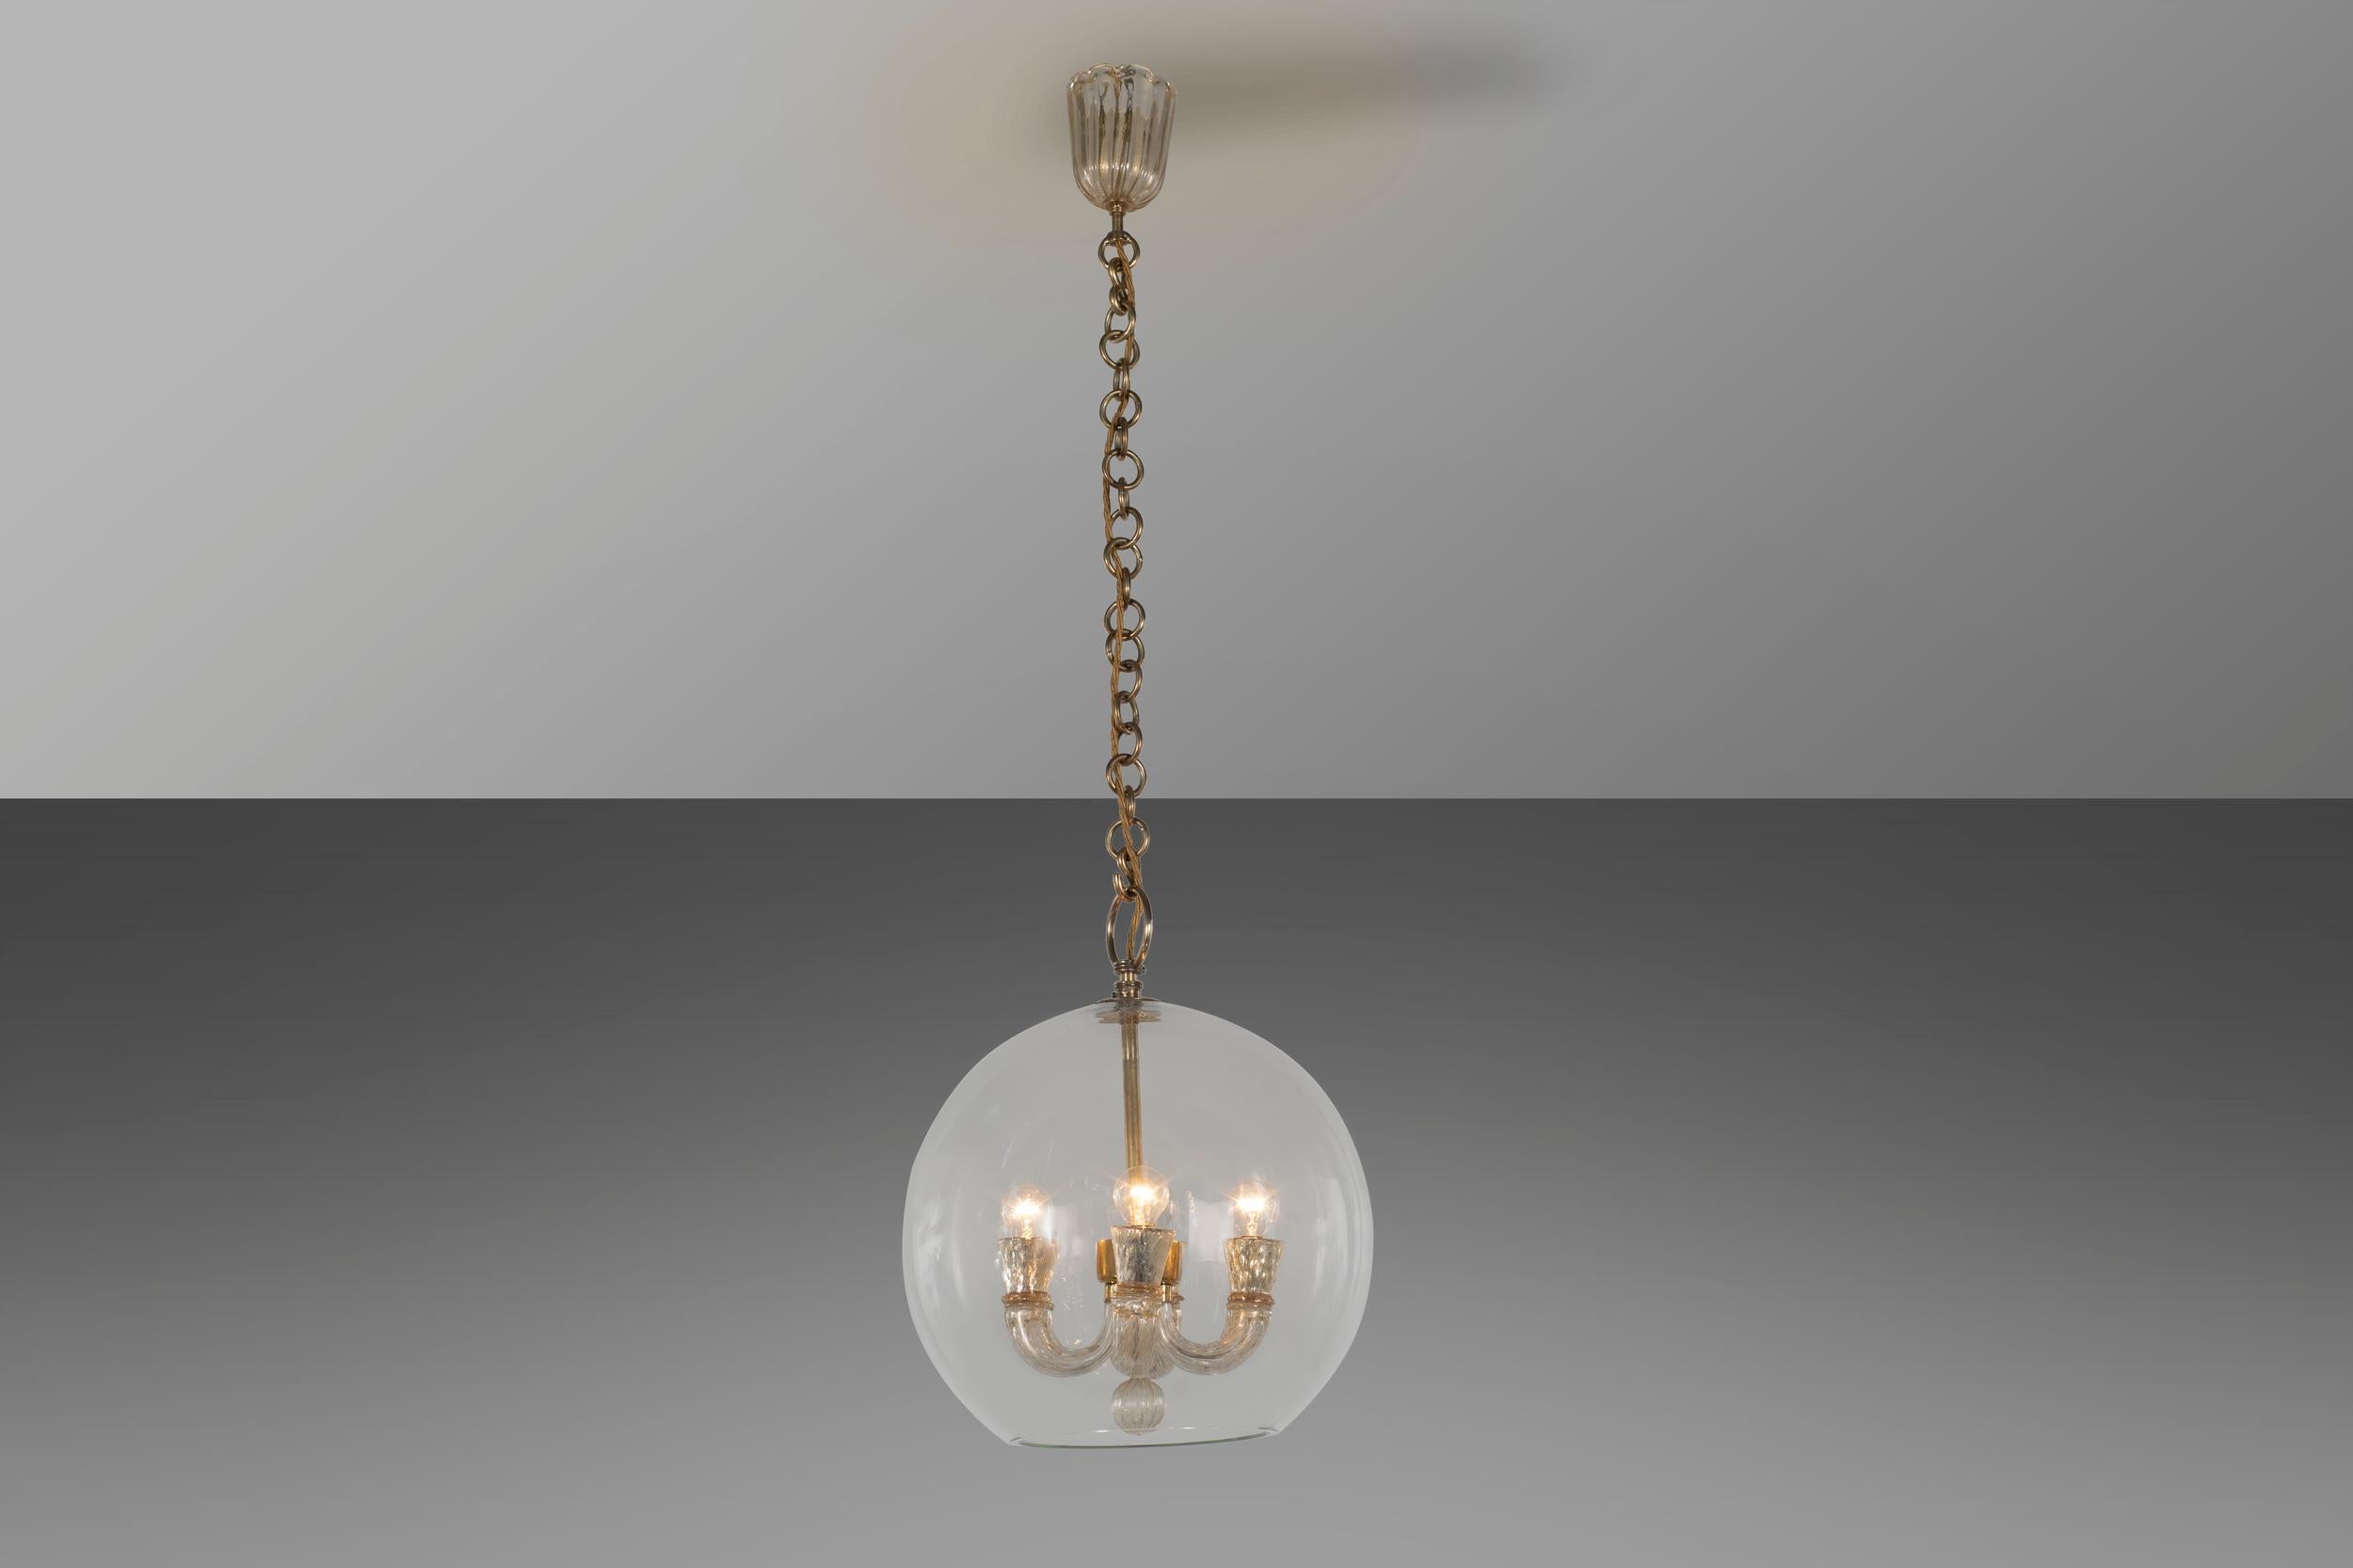 The Murano glass chandelier is divided into two distinct sections, the finely executed glass sphere with delicate glass surrounding the internal structure. The glass inside has shades of gold set in Murano glass while the support chain is made of